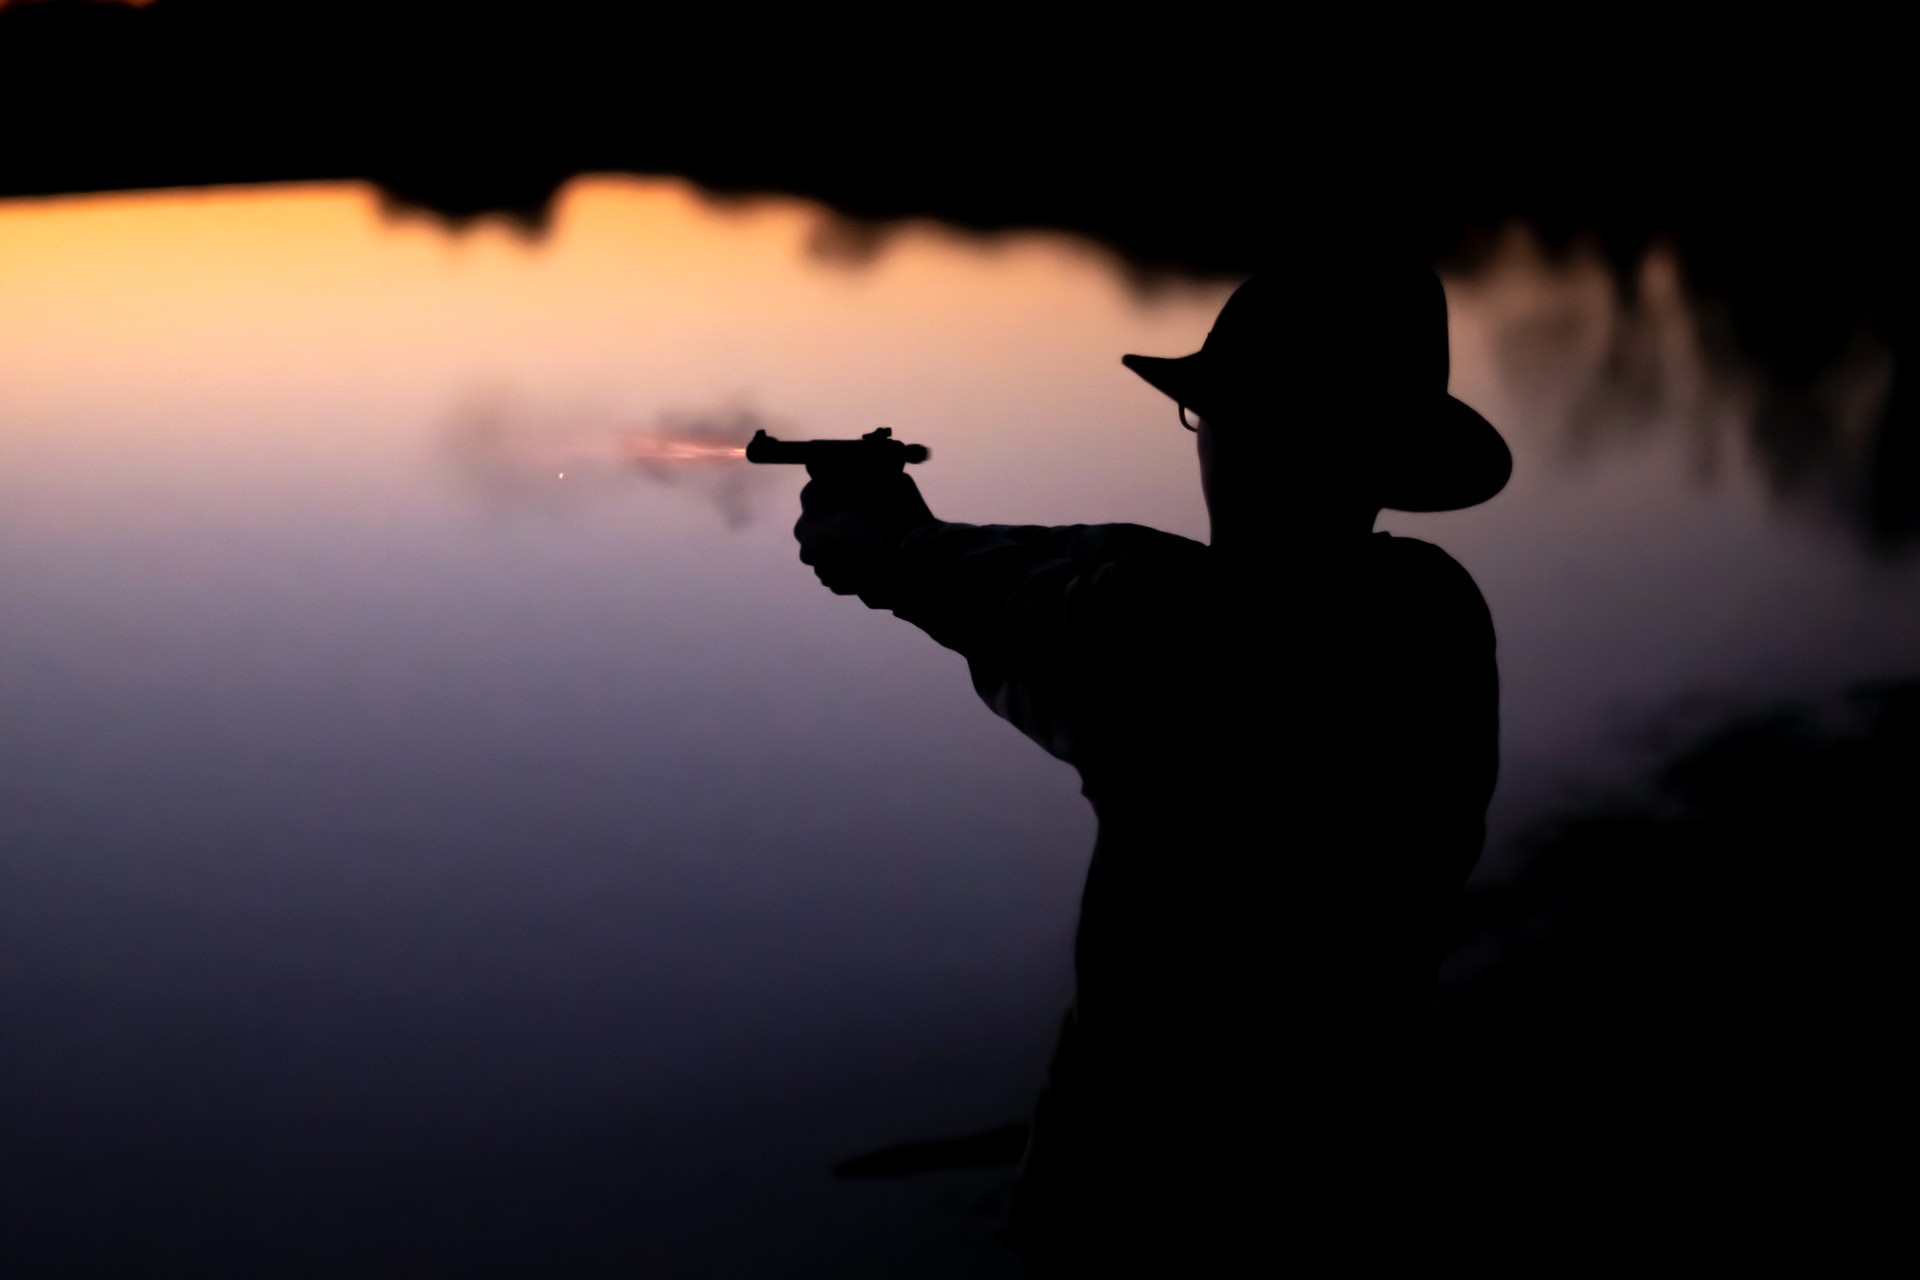 Silhouette of man in hat, shooting pistol over water.